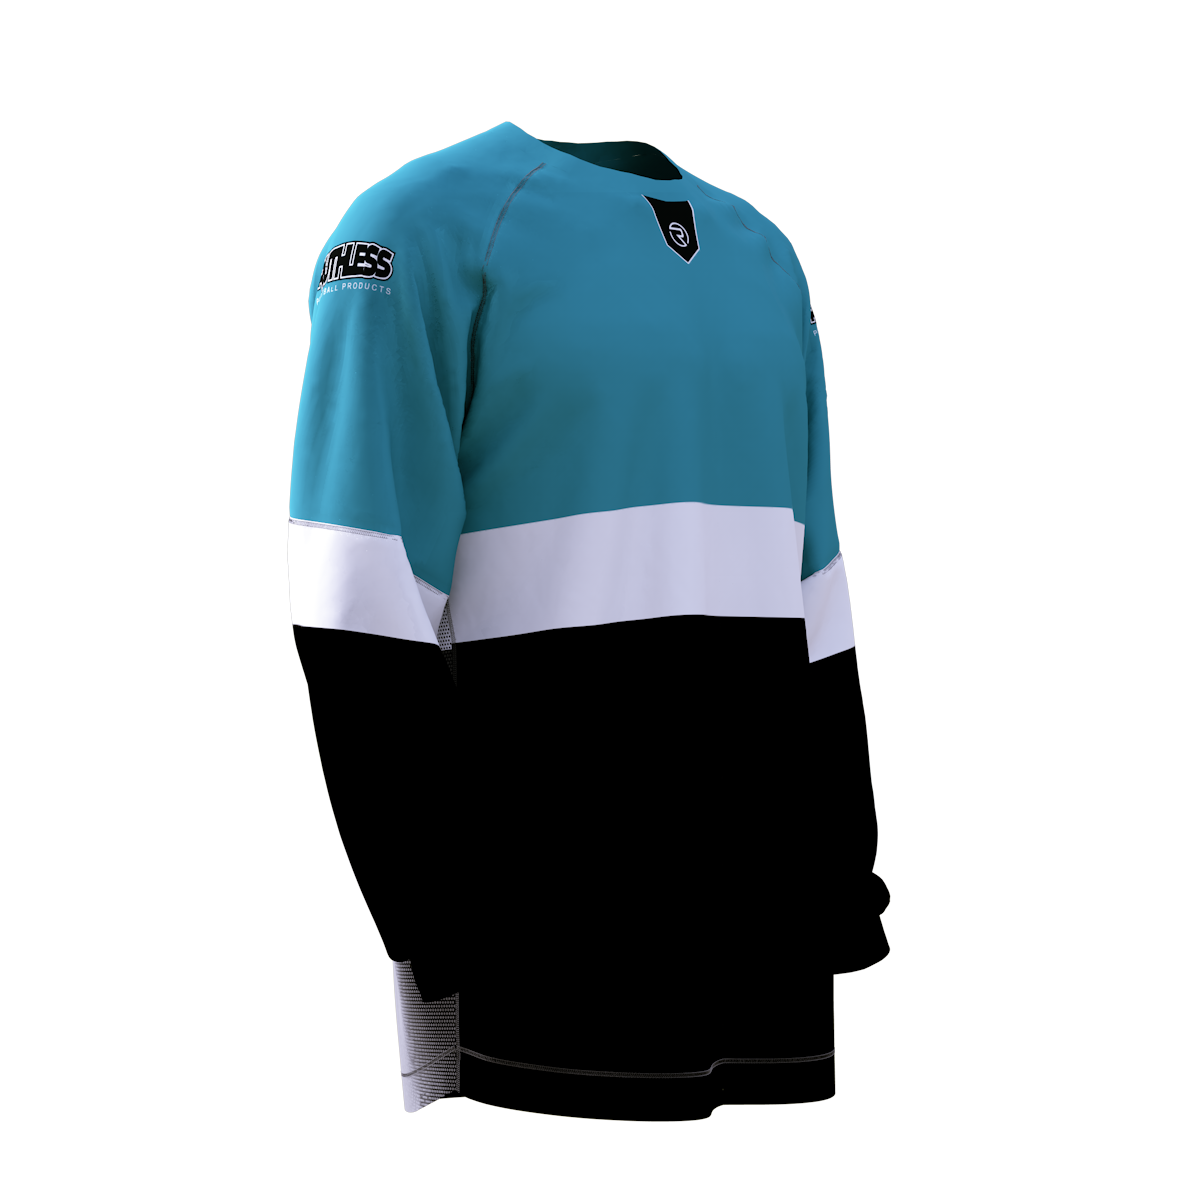 Shark Breeze Jersey - Ruthless Paintball Products